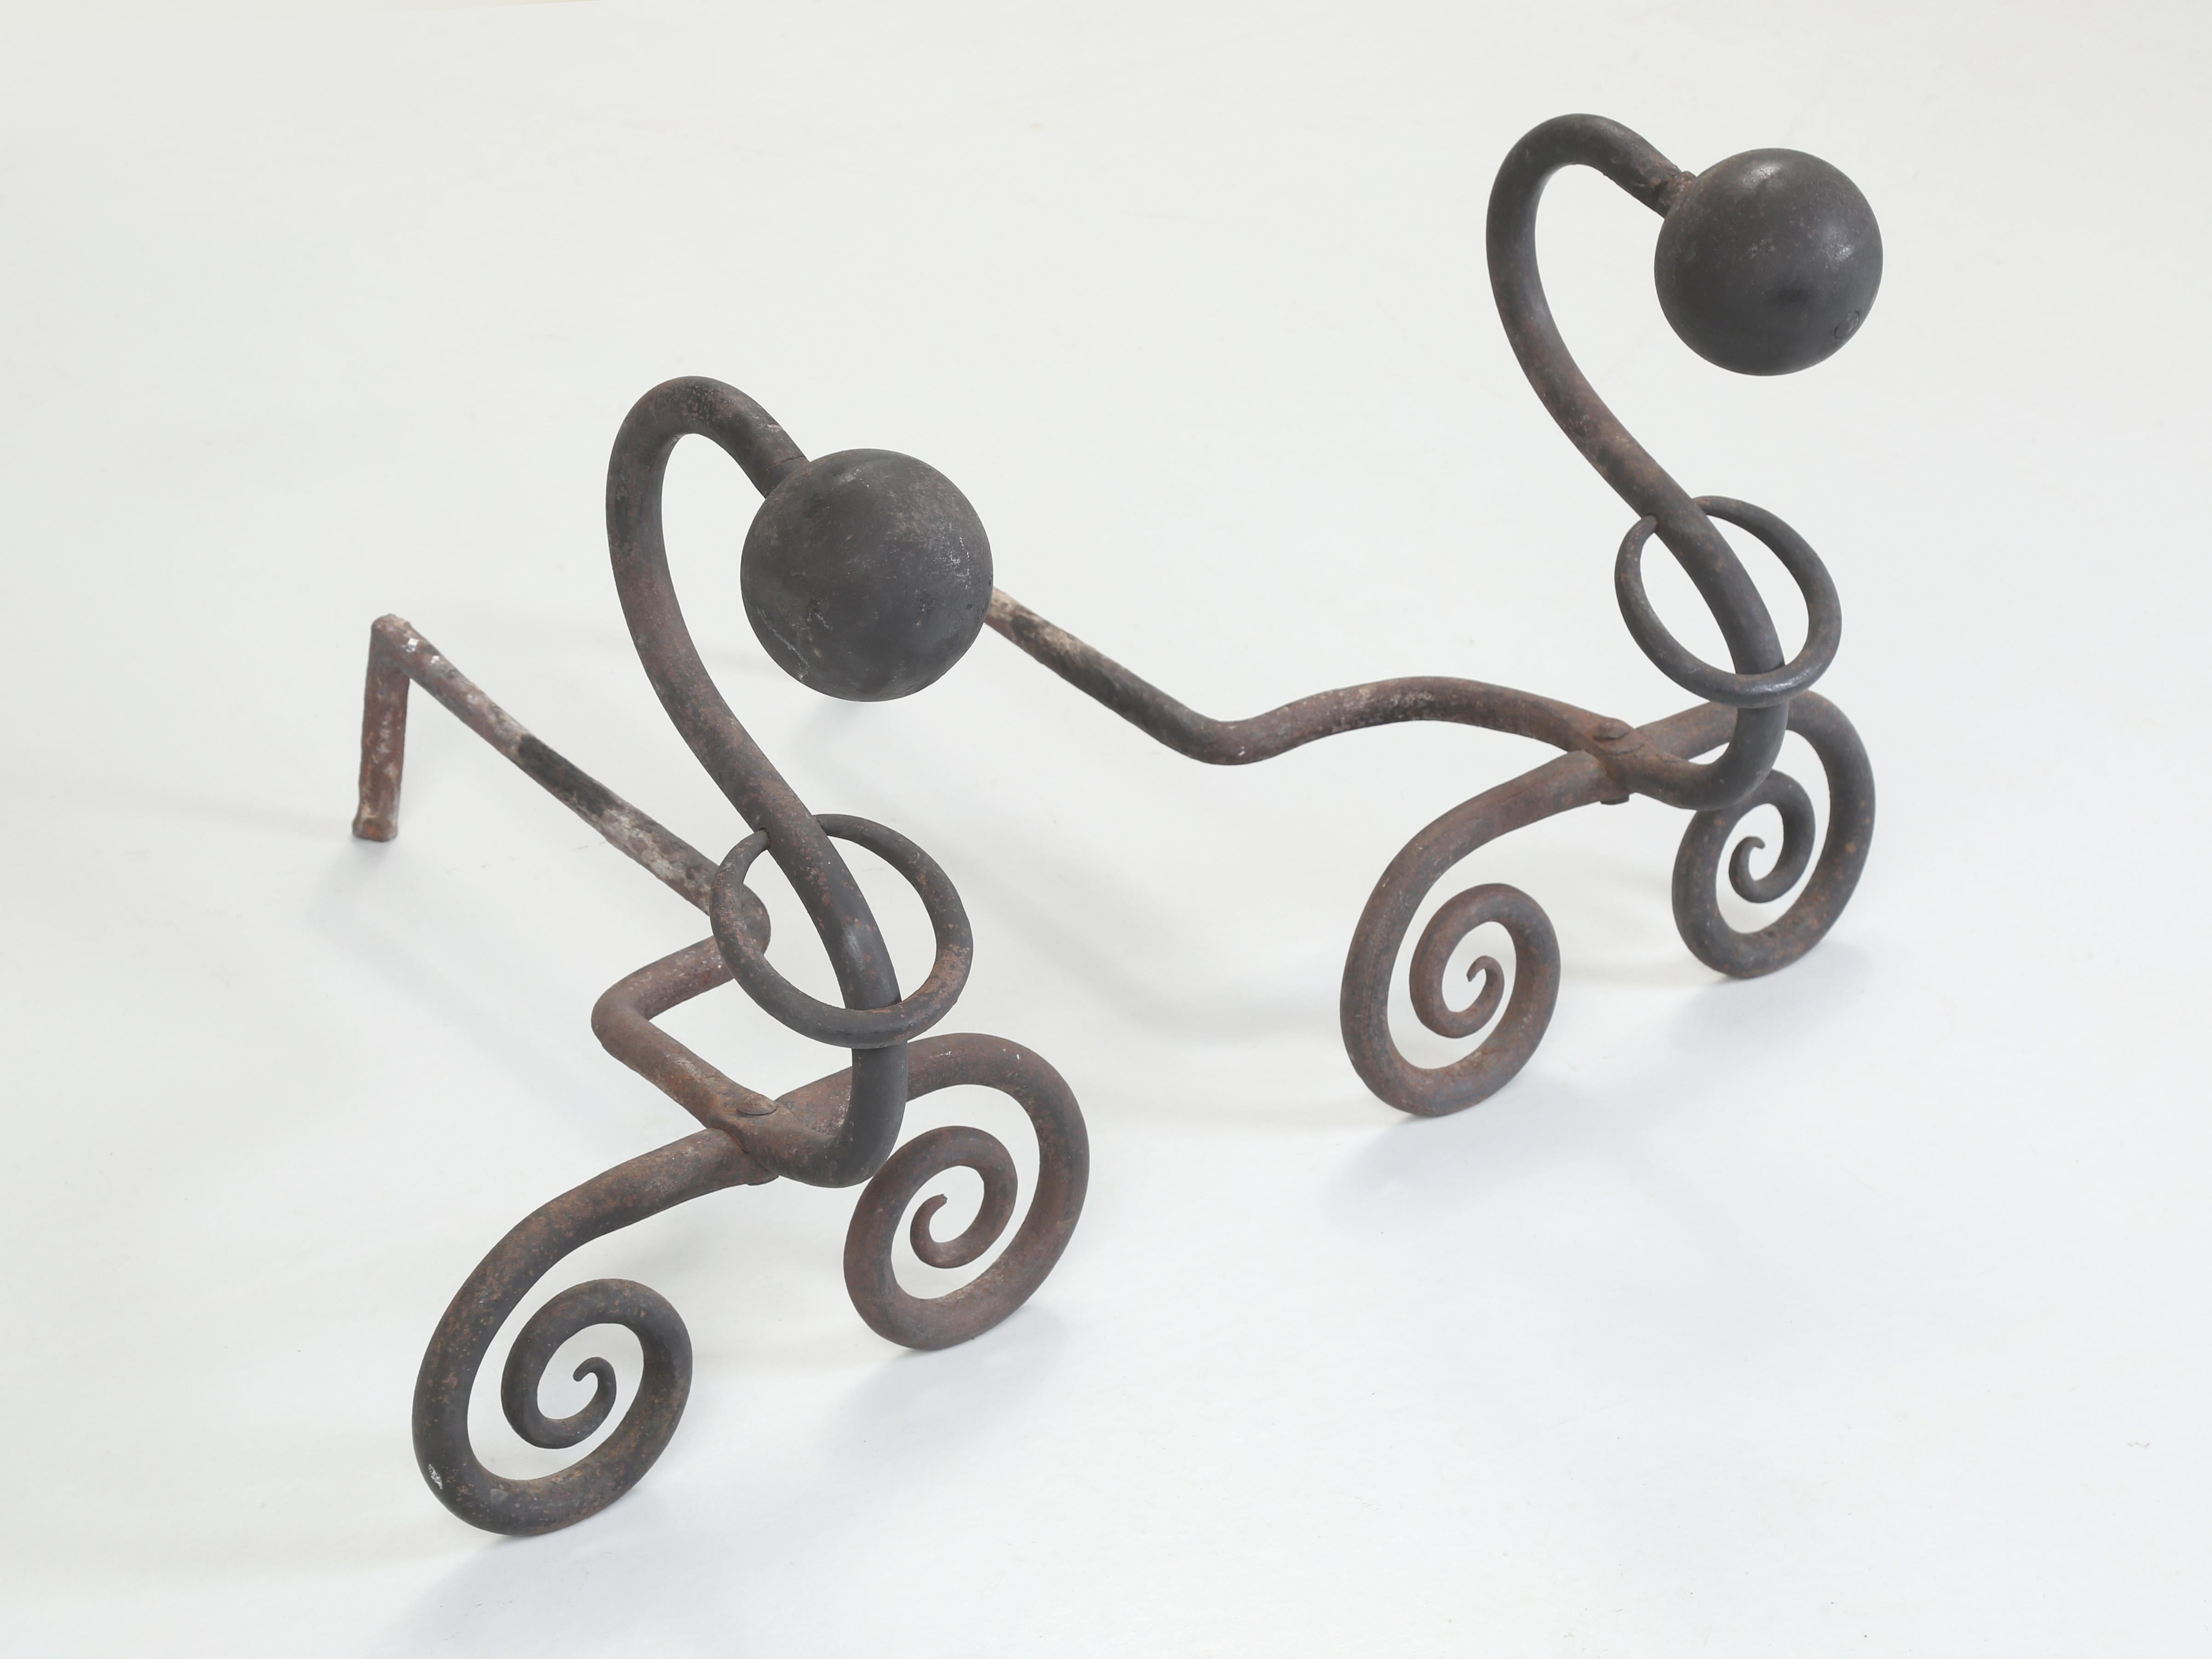 Wrought Iron Fireplace Andirons. Modernist style with a curled form and sphere tops. hard to pinpoint when they were made, but they seem to have a bit of that French 40's style about them, so that's our best hypothesis about their origin. You can